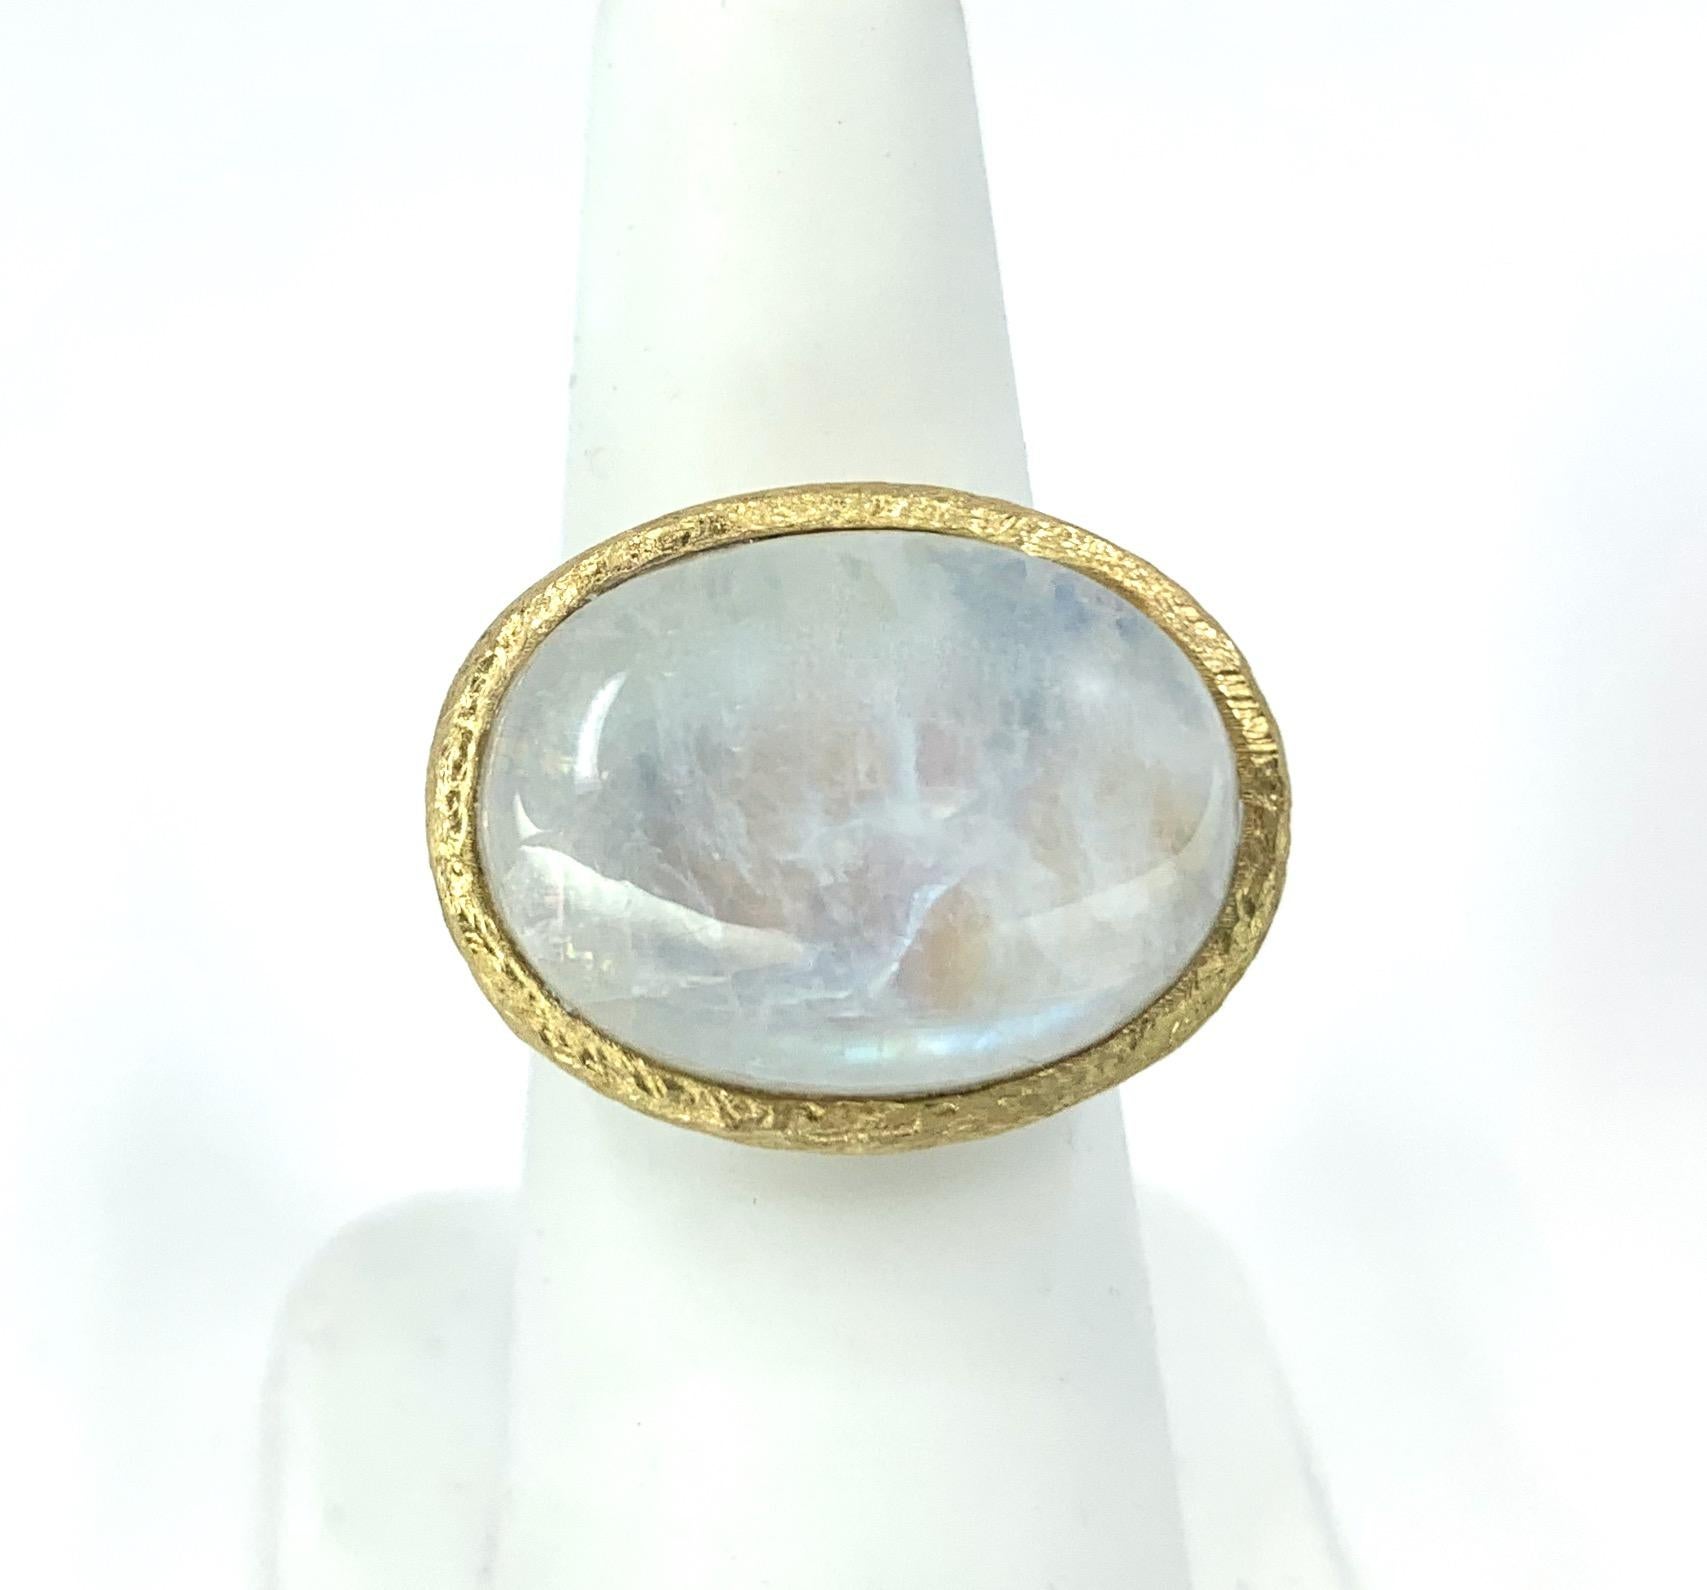 Eytan Brandes sculpted this modern, eye-catching bezel ring to display a 16 carat oval moonstone cabochon.  The stone has wonderful natural striations and almost opalescent luster, and it's perfectly set off by its neat surrounding ring of rich 18